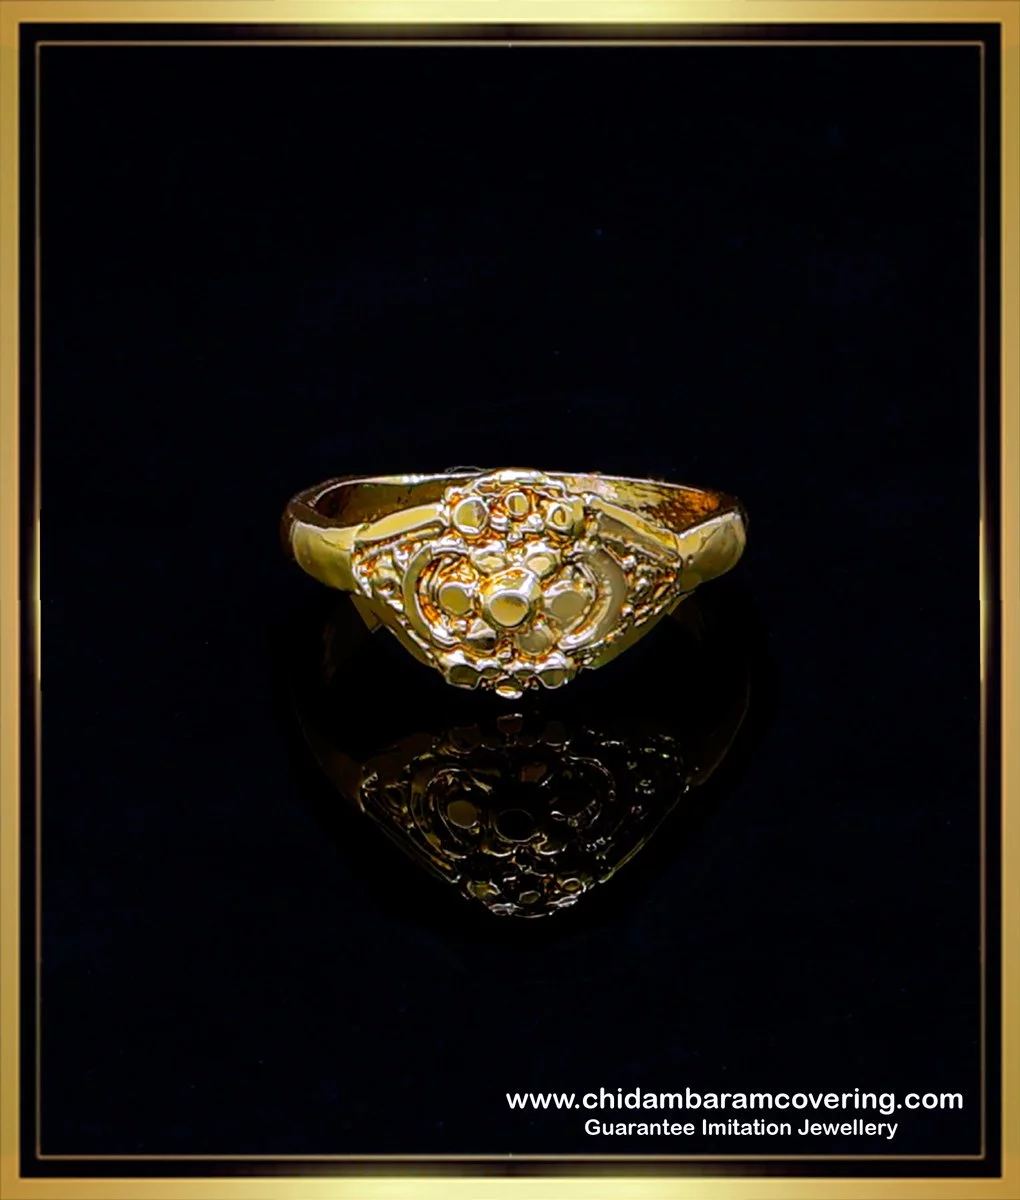 Latest gold ring designs | Daily Wear Gold Rings Designs For Women | raz...  | Gold ring designs, Ring designs, Gold rings